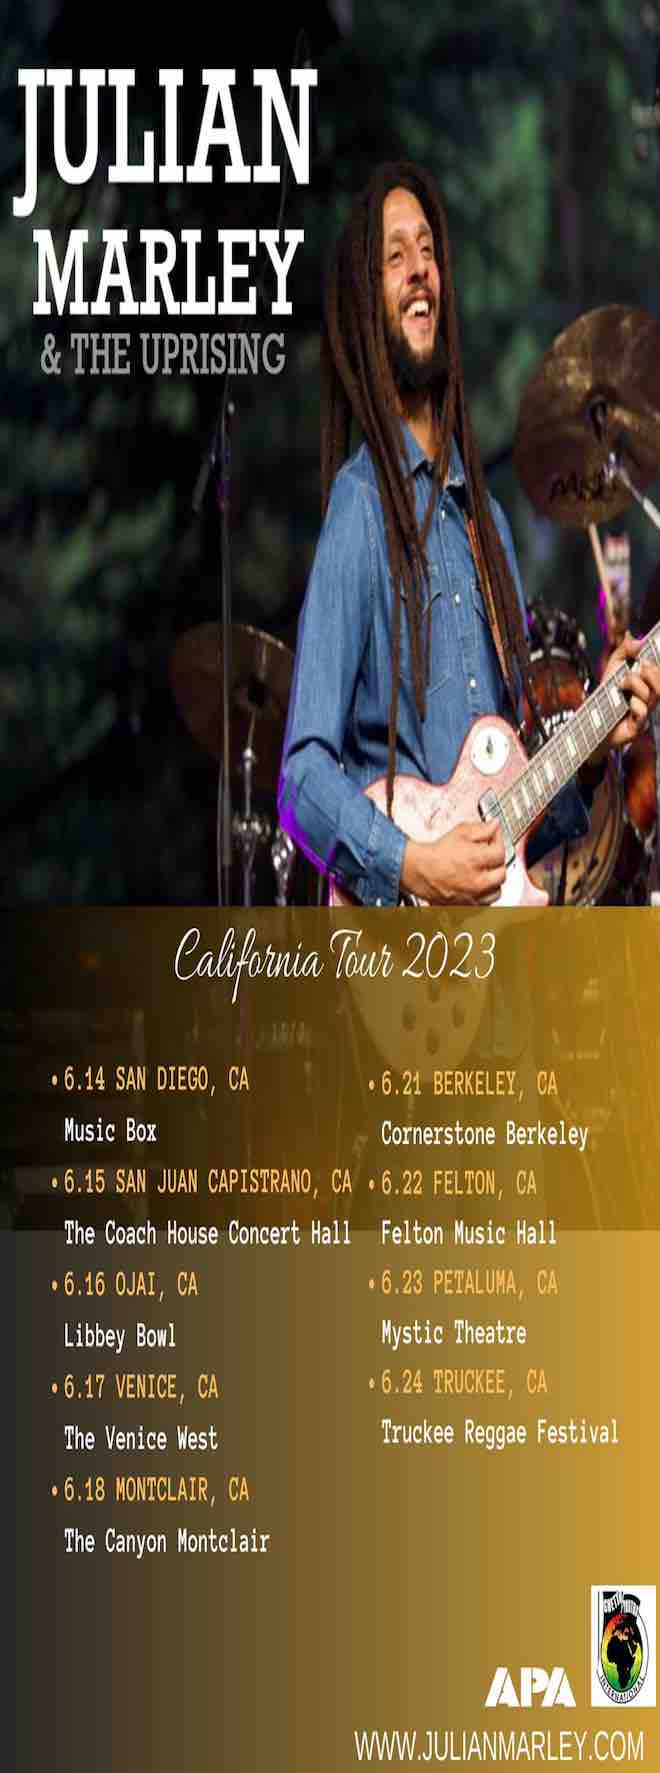 julian marley and the uprising california tour dates 2023